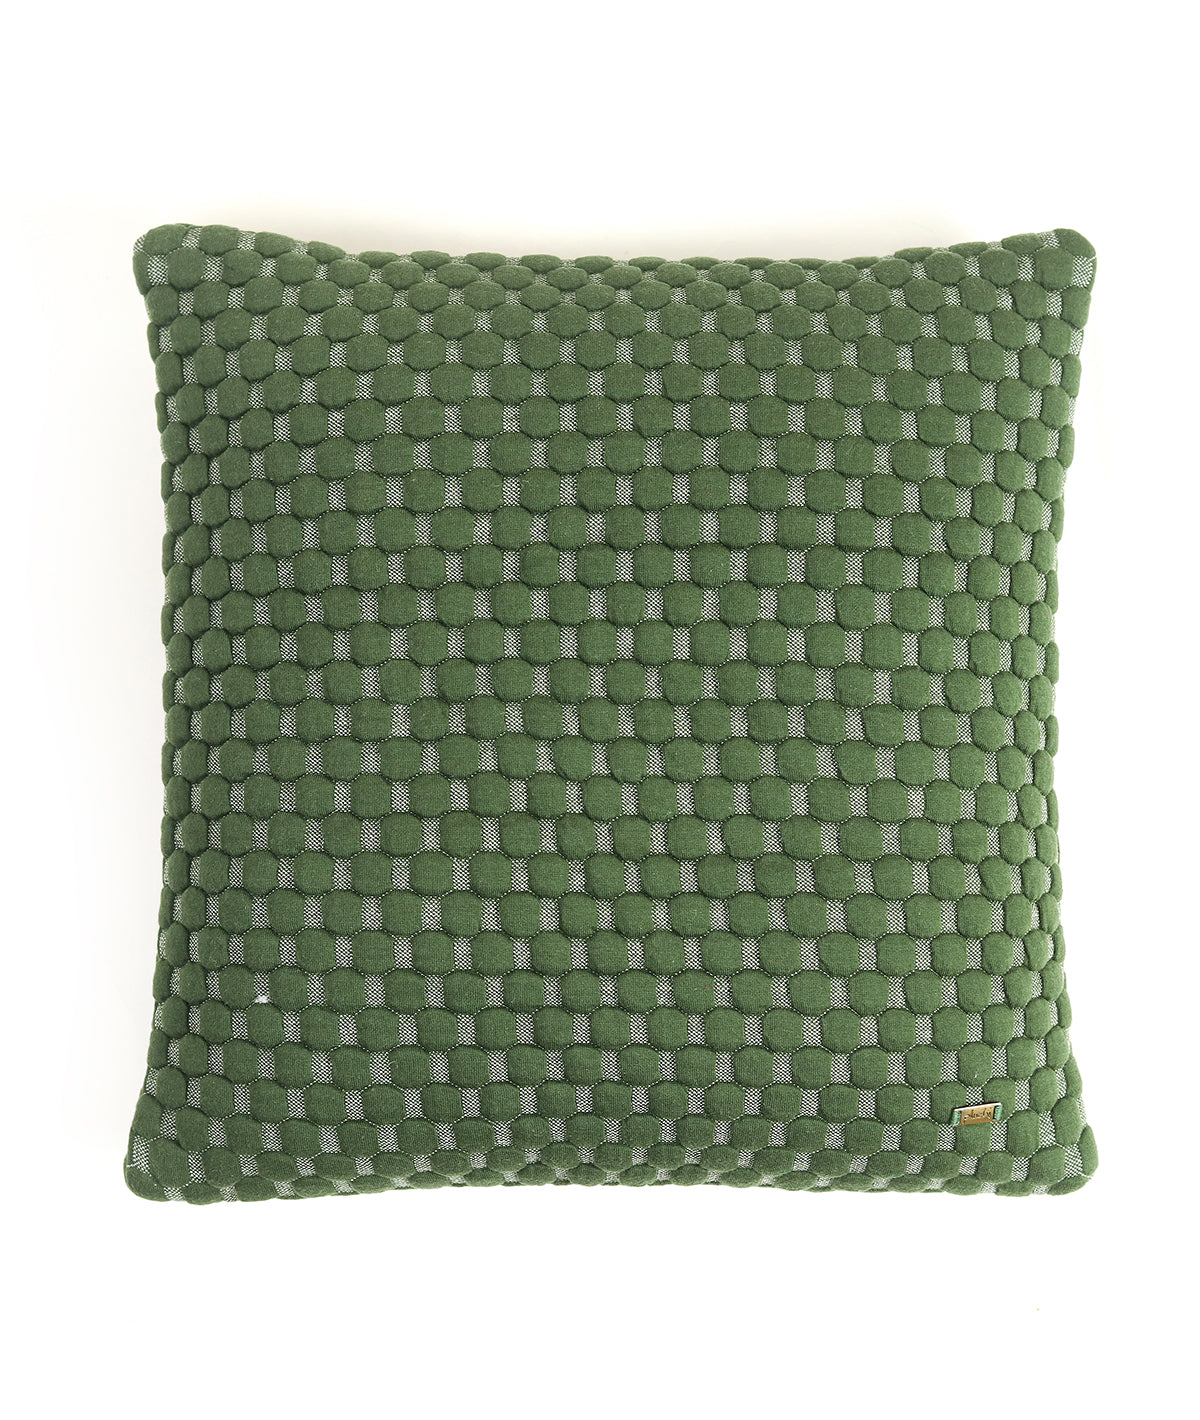 Bubbles Green & Natural Quilted Cotton Knitted Decorative 18 X 18 Inches Cushion Cover